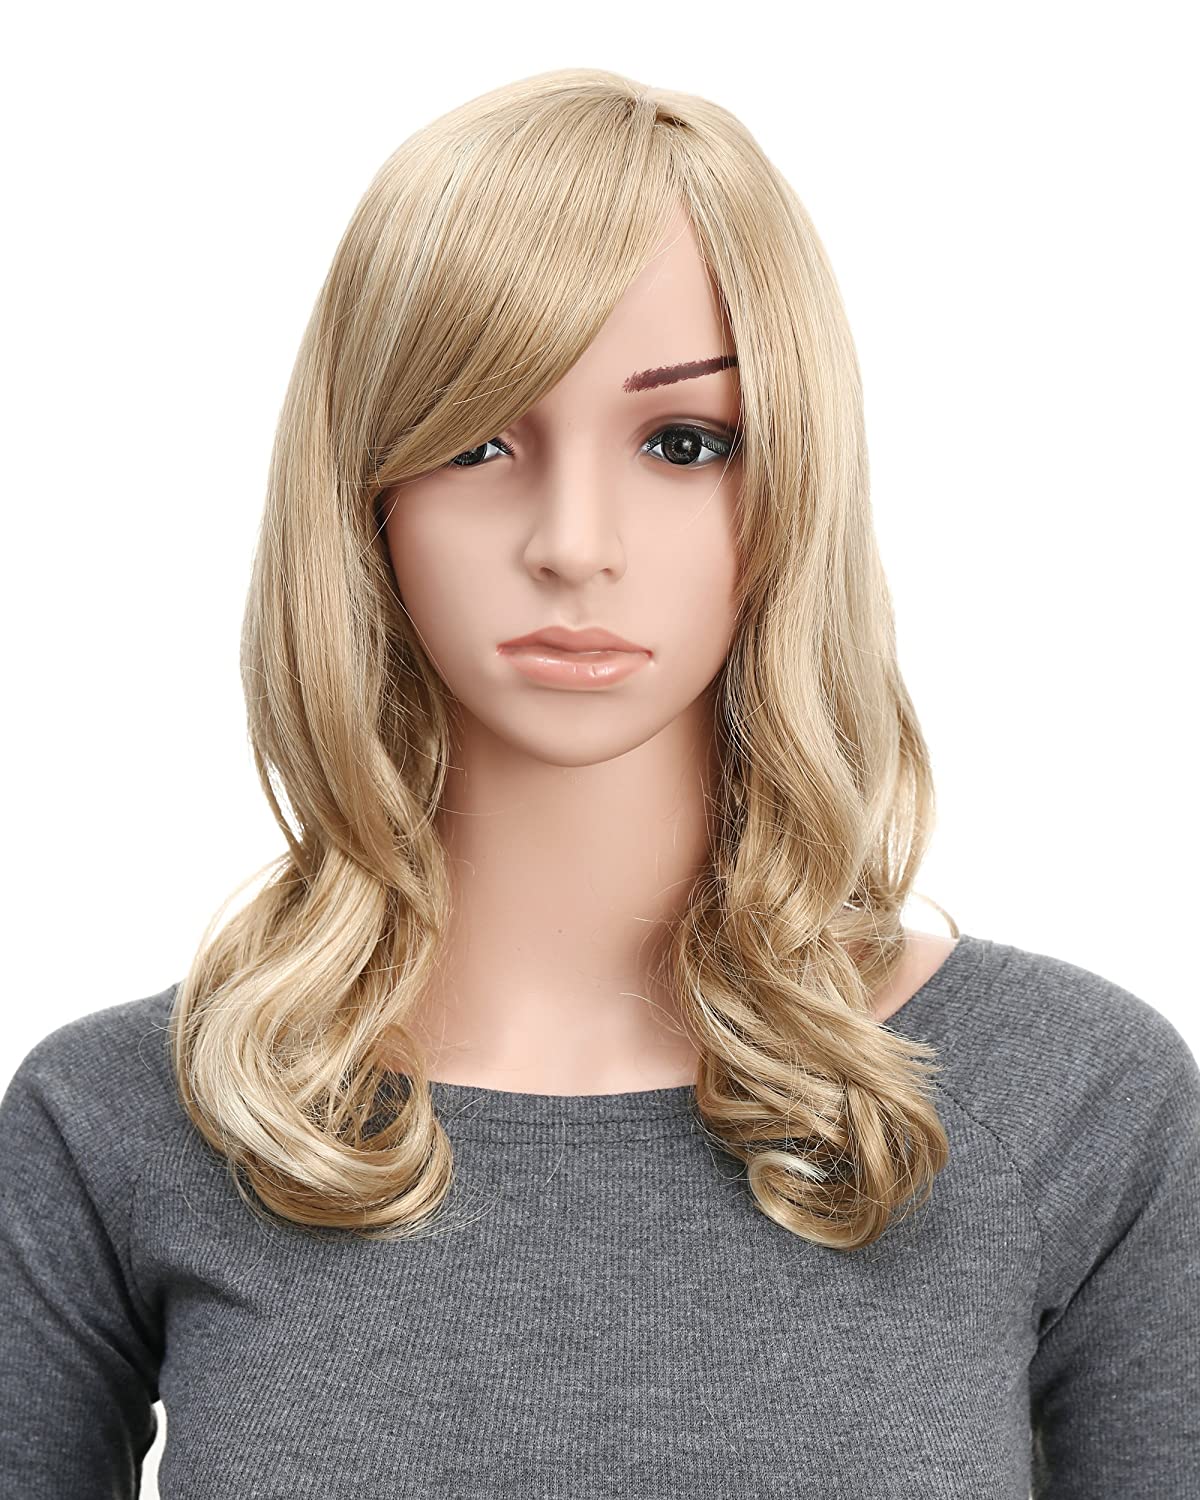 Onedor Full Head Beautiful Long Curly Wave Stunning Wig Charming Curly Costume Wigs with Fringe (24H613 Blonde Highlights) - image 1 of 6